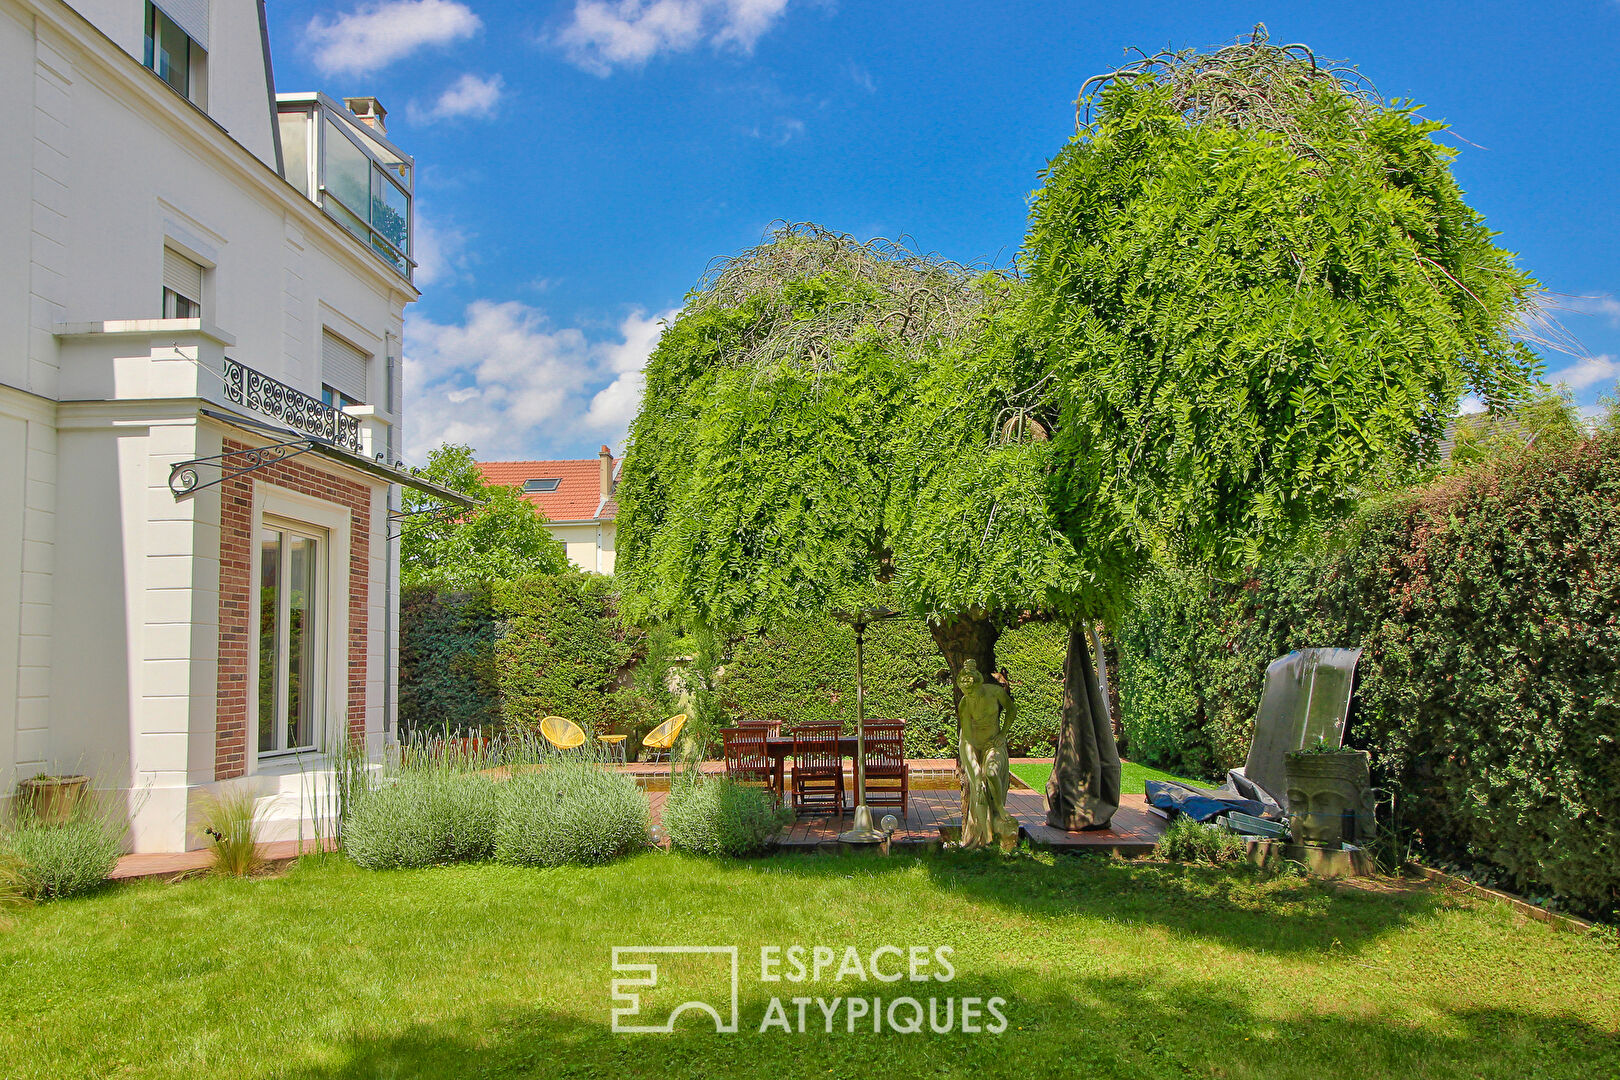 Renovated bourgeois house with swimming pool